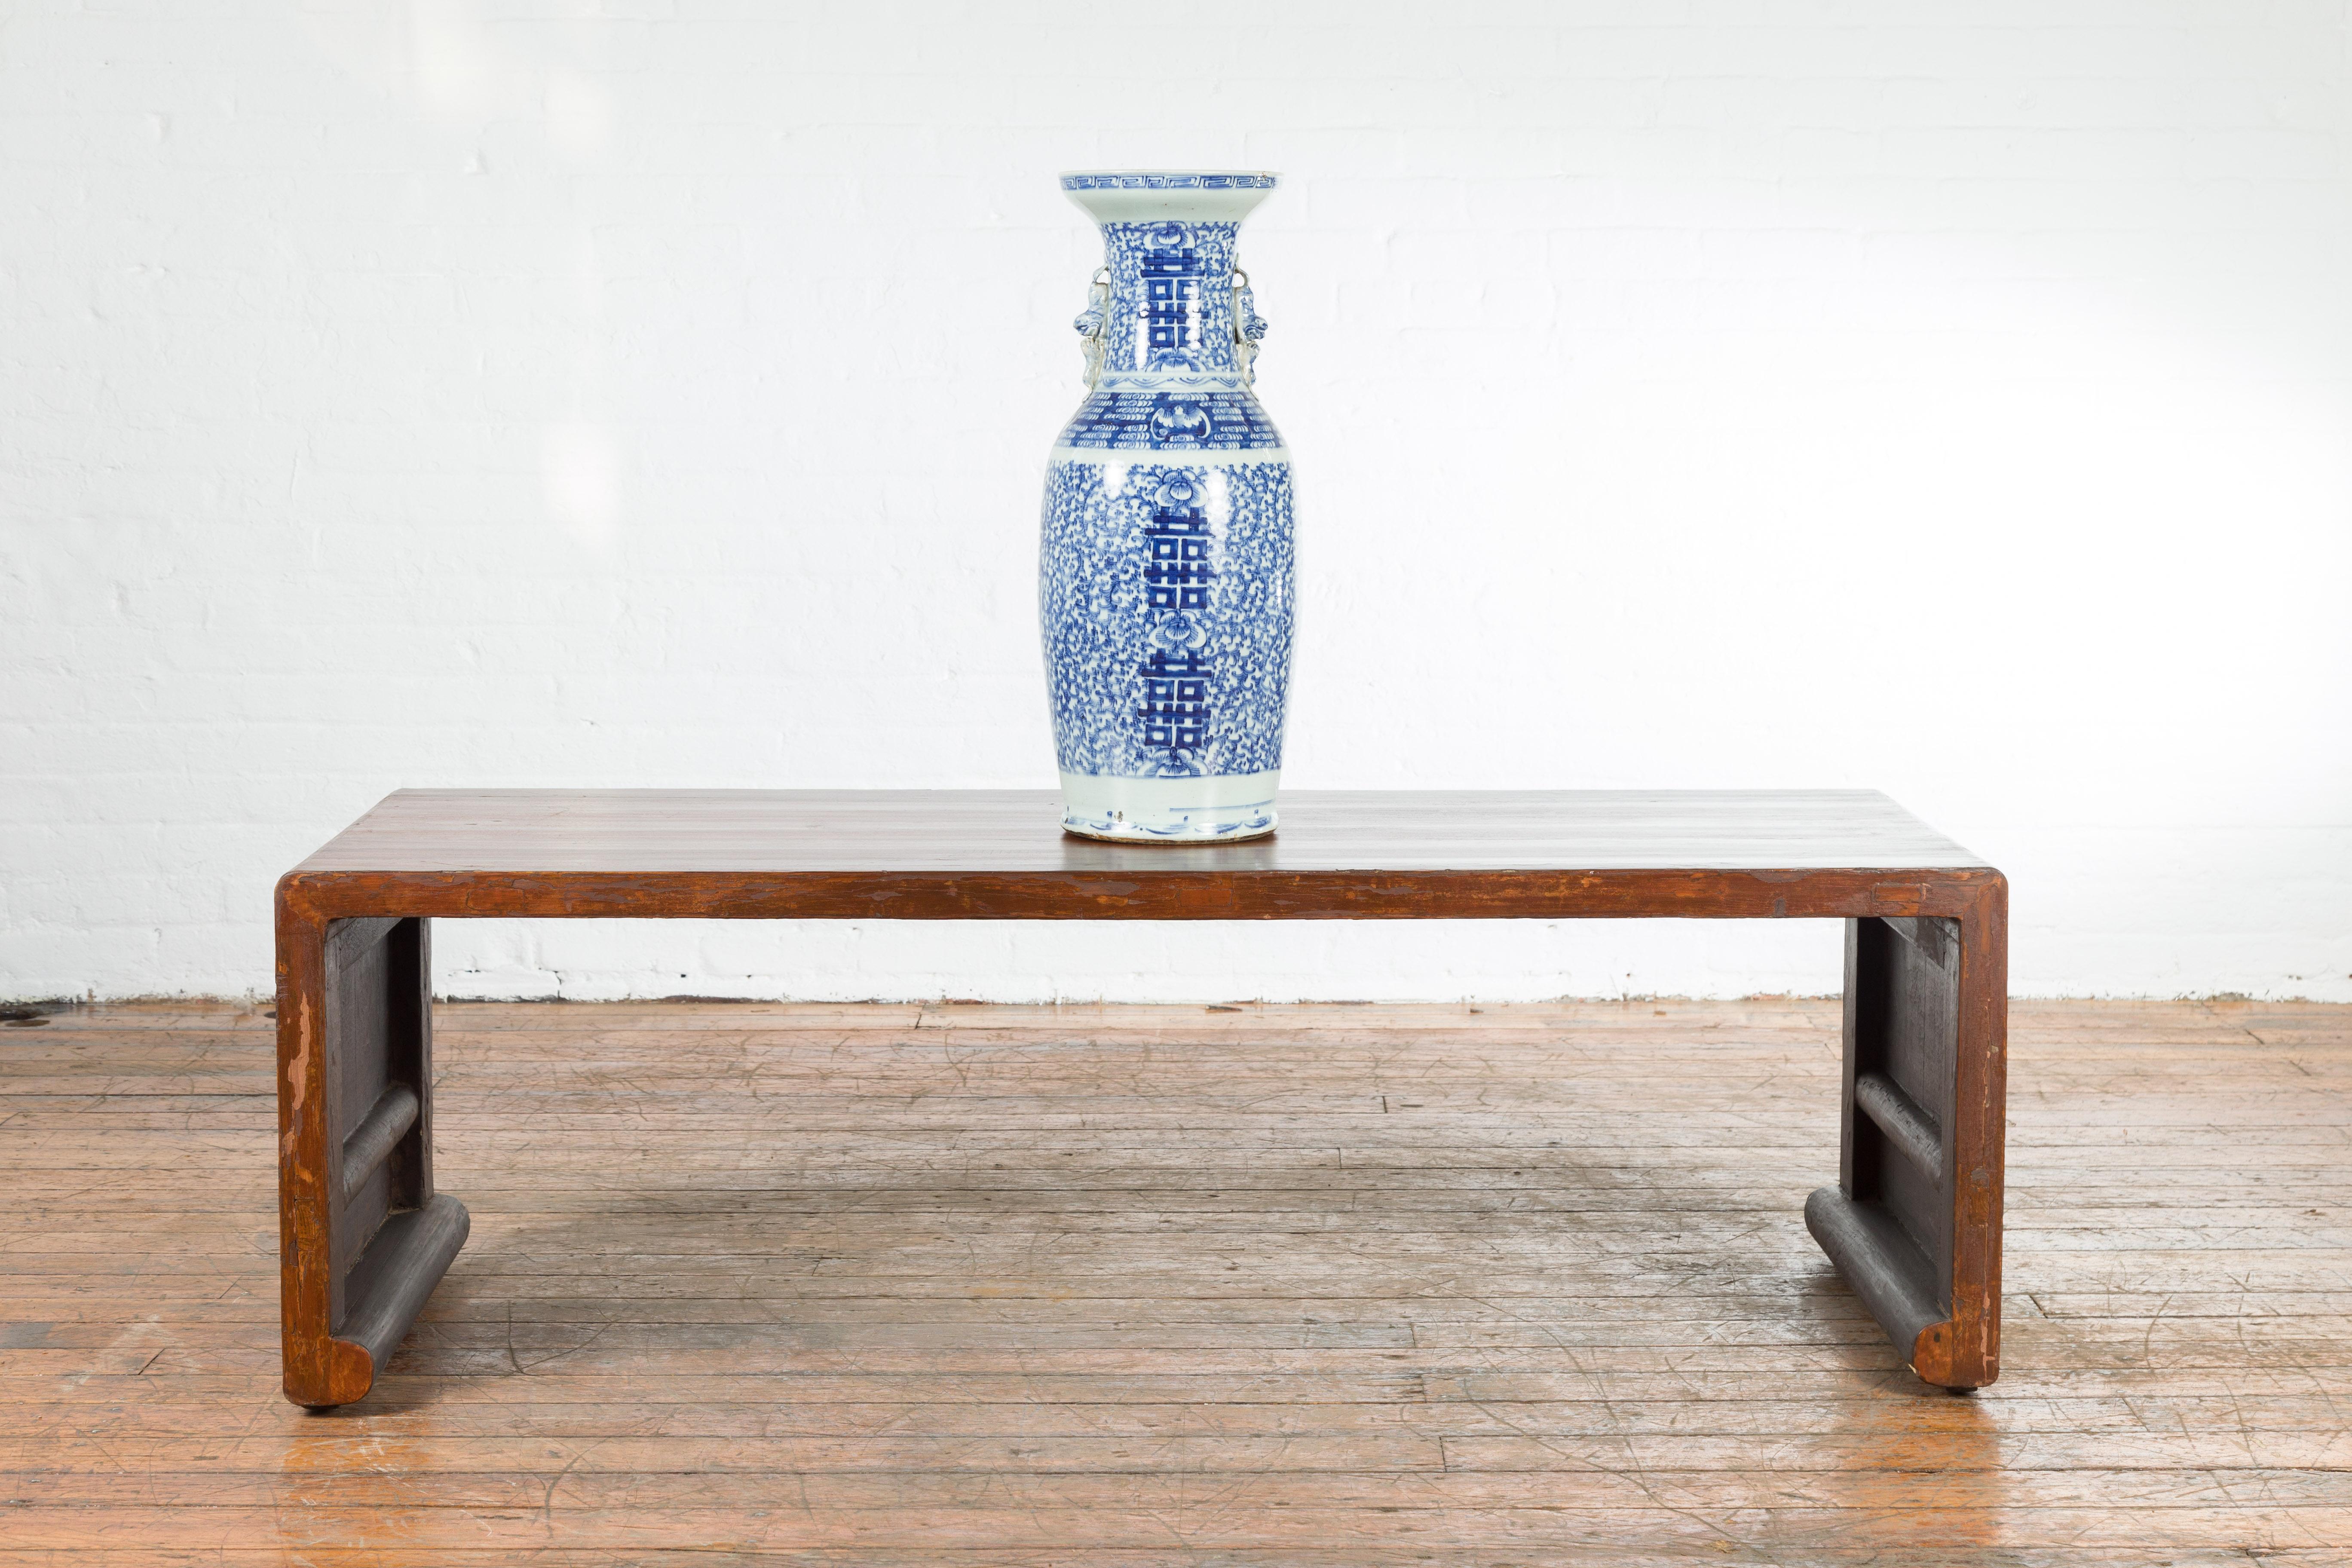 A Chinese vintage wooden waterfall coffee table from the mid 20th century, with scrolling extremities. Created in China during the midcentury period, this waterfall table features a rectangular top raised on solid board legs with scrolling accents.